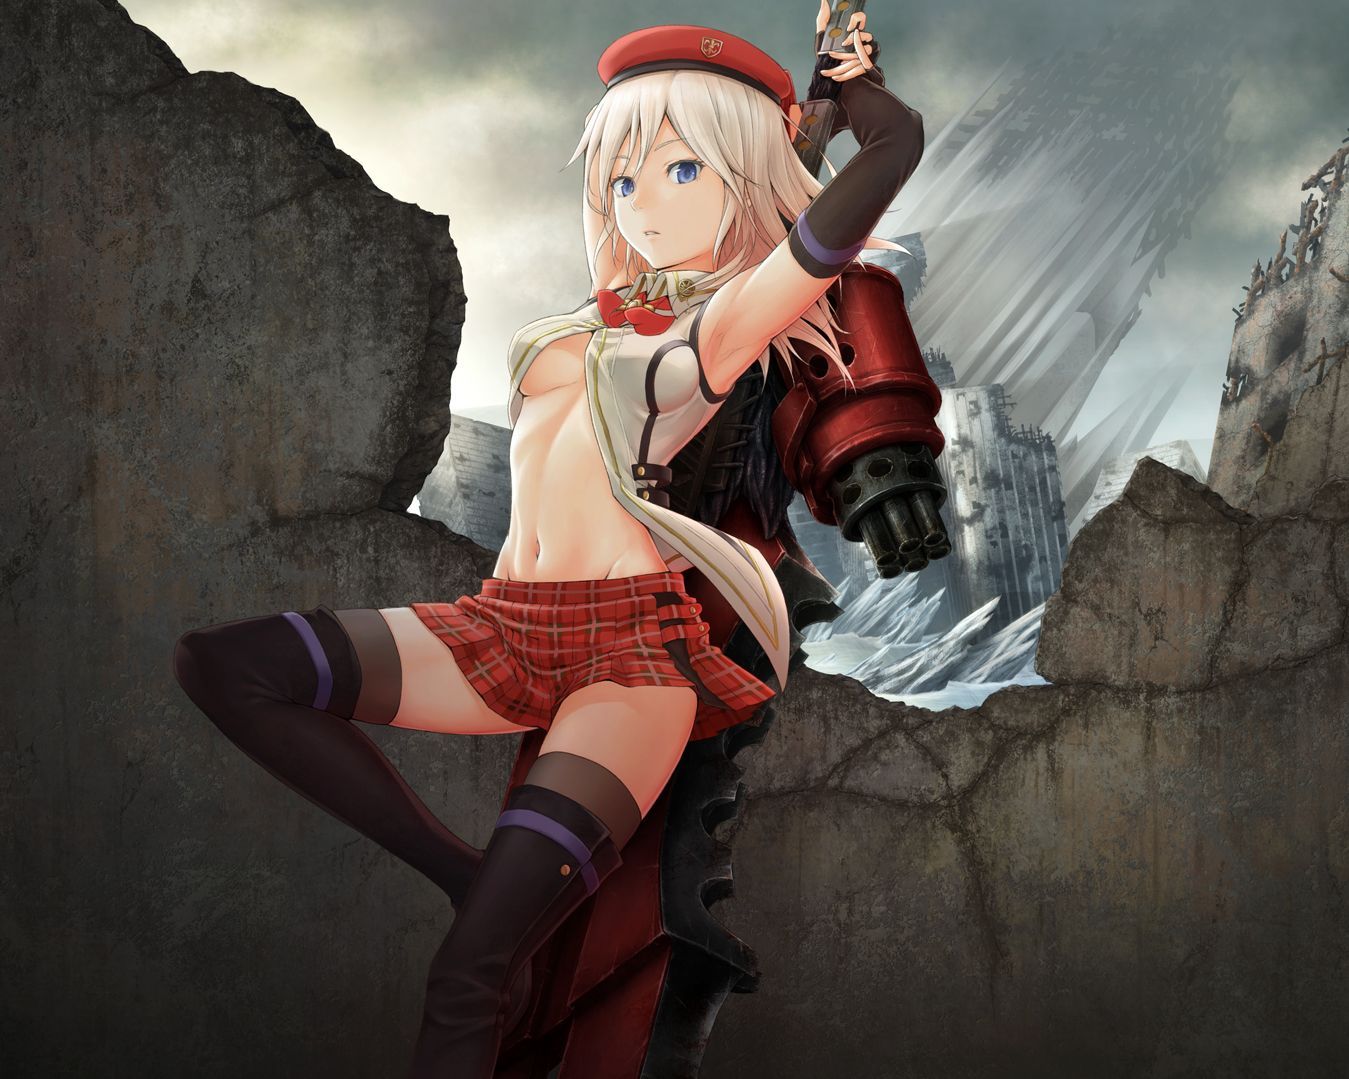 【God Eater】Alisa's cute picture furnace image summary 6